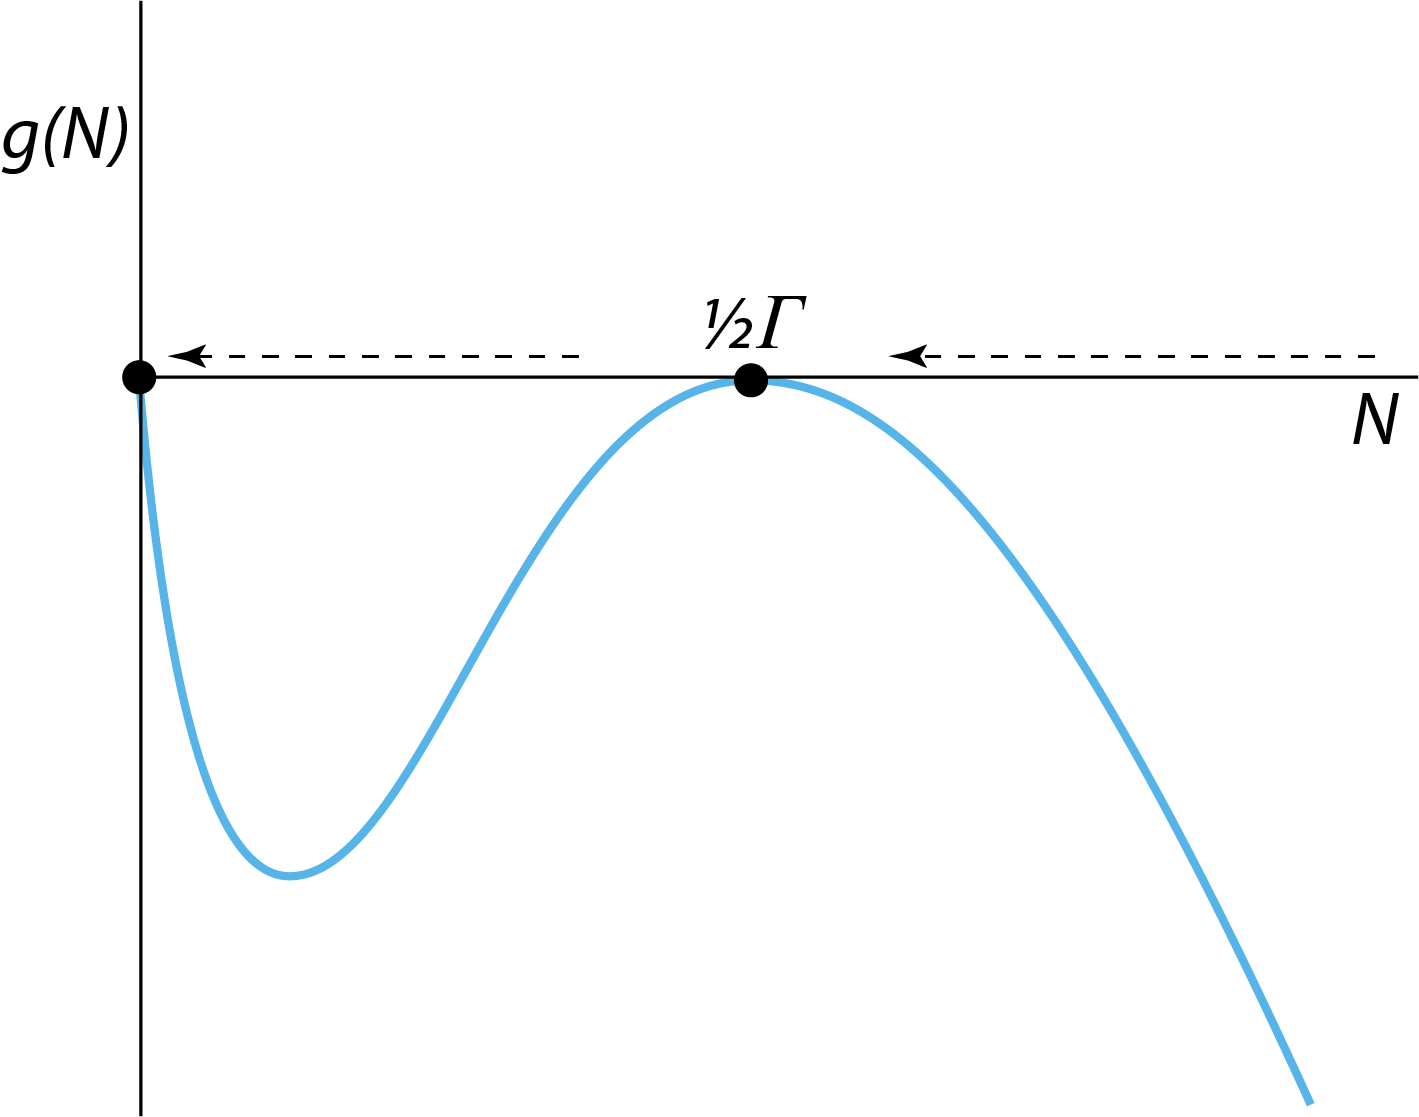 The right-hand side $g(N)$ of the ODE describing the dynamics of the two-sexes population growth model for the critical value $\beta=4\delta/\Gamma$. The horizontal arrows indicate that for values of $N$ the population growth rate is negative (left-pointing arrows) and the population abundance $N$ will therefore decrease over time, except for $\tilde{N}=\tfrac{1}{2}\Gamma$.